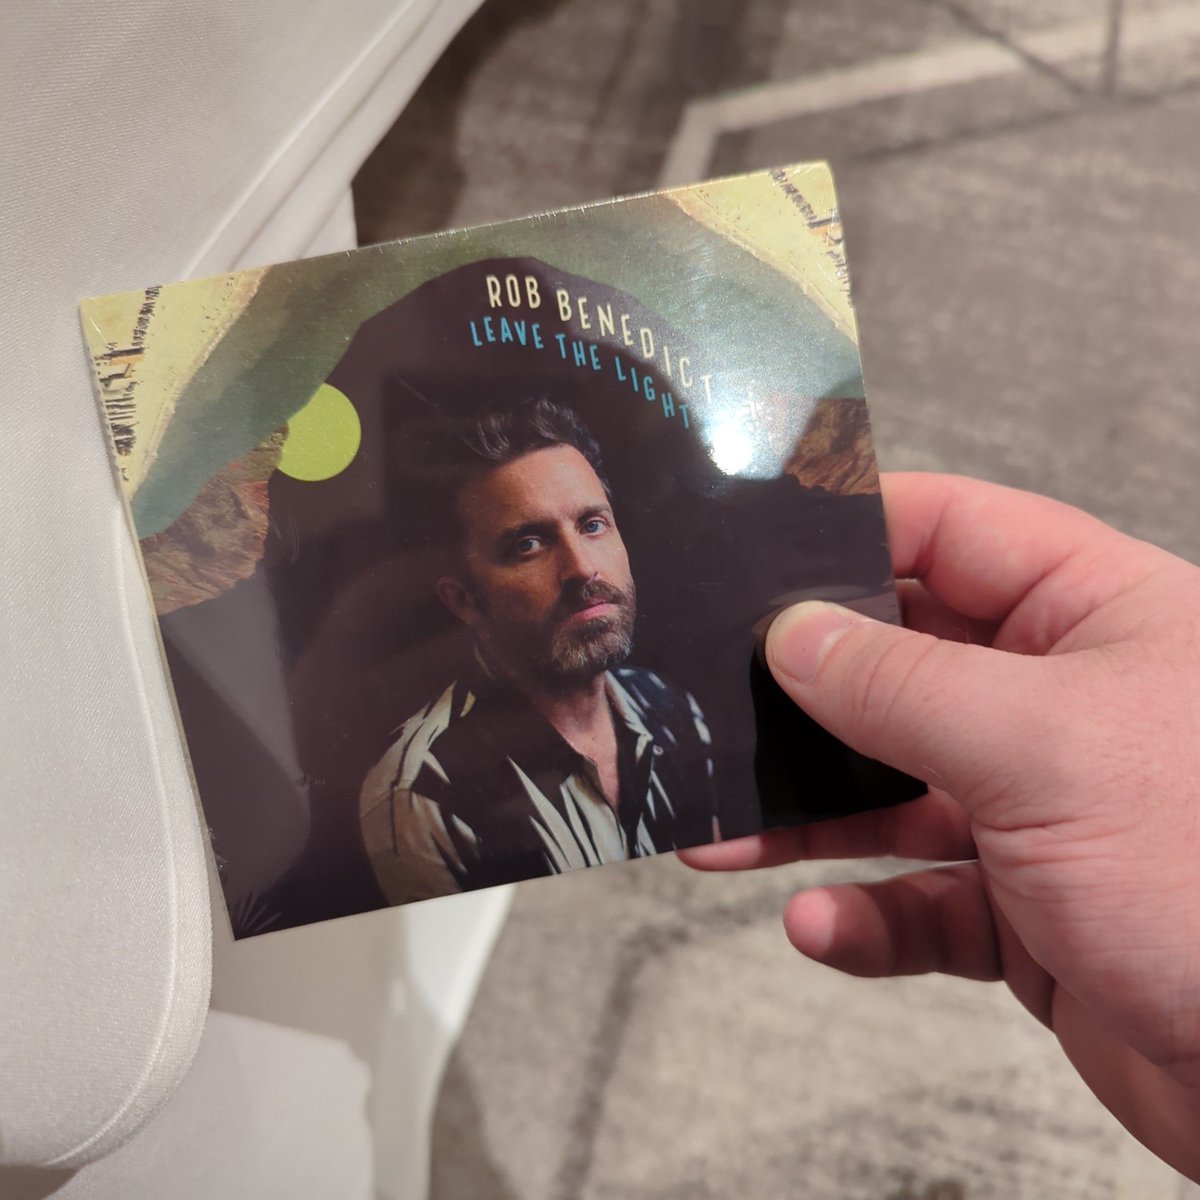 Available for purchase, Rob Benedict leave the light on CD £20 please see the autograph team, #crossroads9 #starfury #theboys #Supernatural